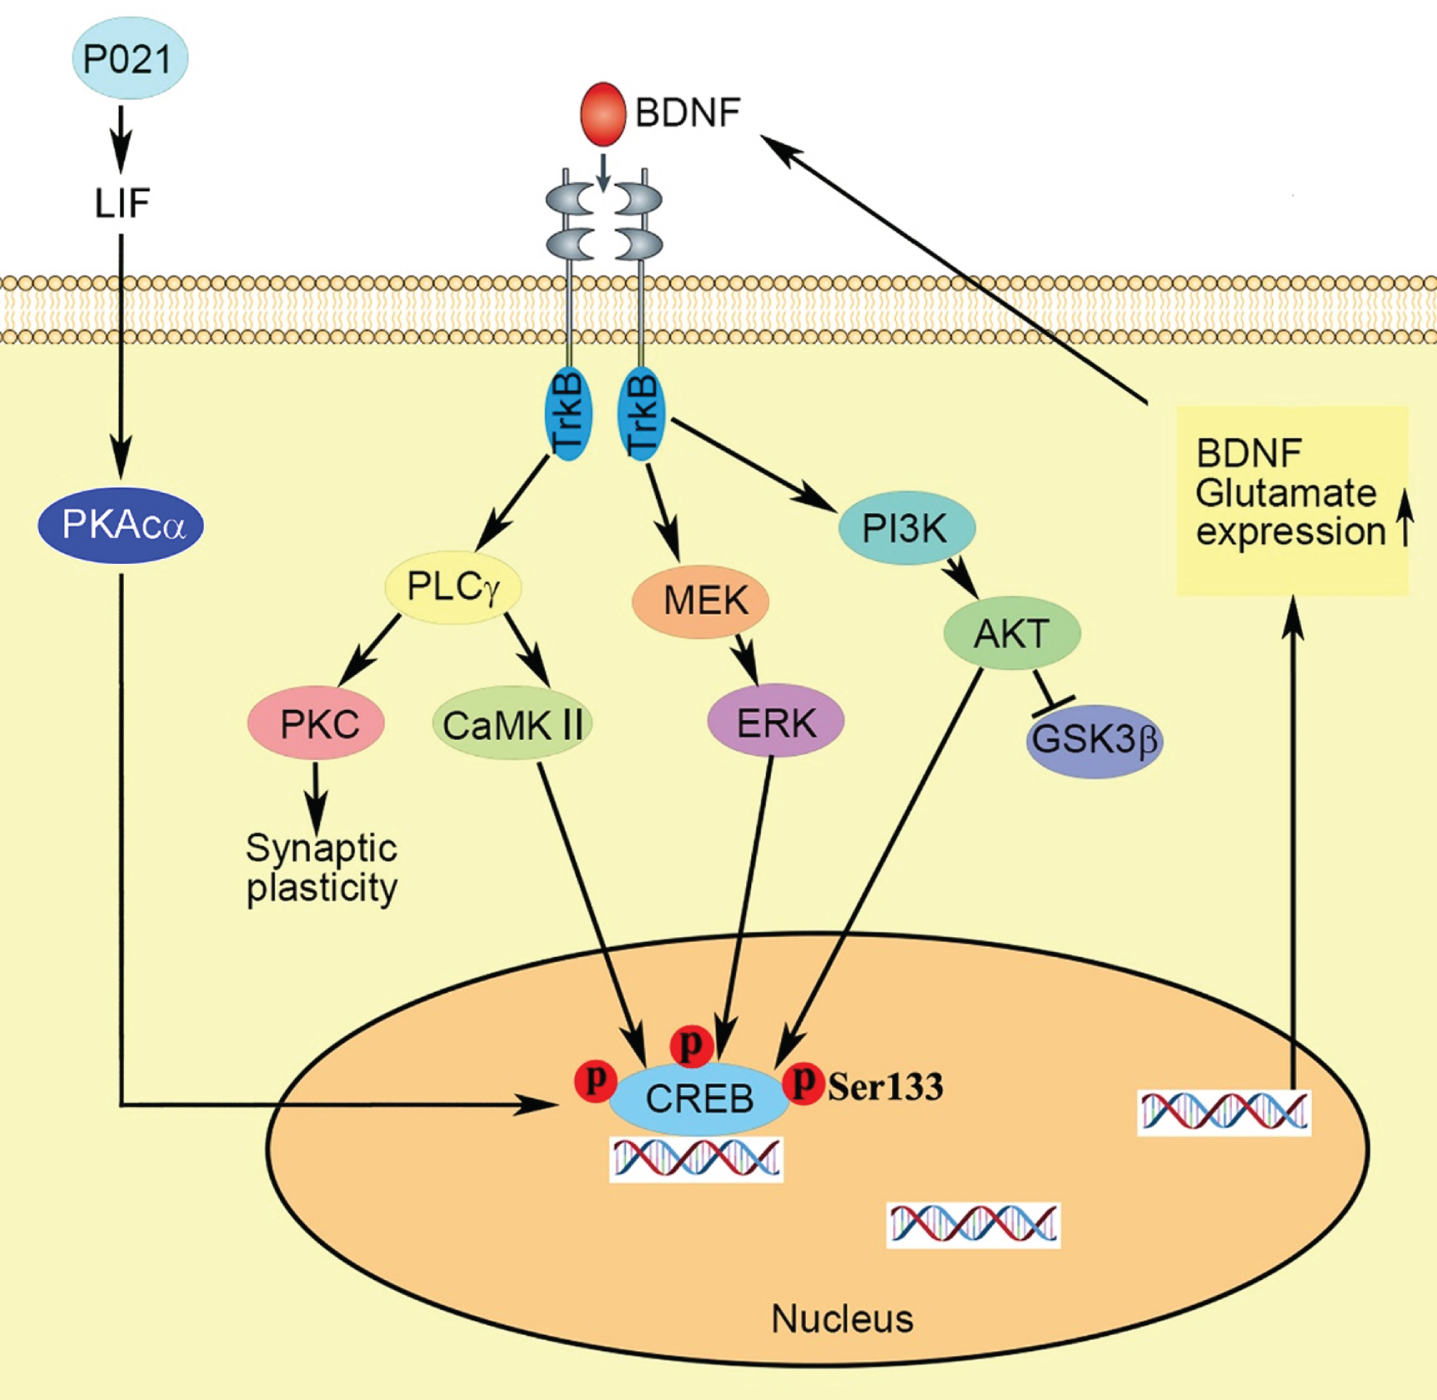 Proposed mechanism of the therapeutic beneficial effect of treatment with P021 started from the day of the birth. Chronic treatment with P021 increases BDNF expression through LIF signaling/ increase in PKAcα and activation of CREB which activates the BDNF-TrkB pathways. The interaction between the receptor TrkB and neurotrophin activates three main intracellular signaling pathways. The MAPK/ERK kinase (MEK) -extracellular signal-regulated kinase (ERK) pathway promotes neuronal differentiation and growth, and the phosphatidylinositol 3-kinase (PI3K)–Akt pathway promotes survival and growth of neurons, and the PLCγ–Ca2 + pathway which stimulates protein kinase C (PKC) and Ca2 +-dependent protein kinase (CaMKII) enhances synaptic plasticity. Activation of CaMKII, ERK and Akt mediates the activation of transcription factor cyclic AMP-responsive element-binding protein (CREB) which enhances expressions of BDNF and glutamate receptors.